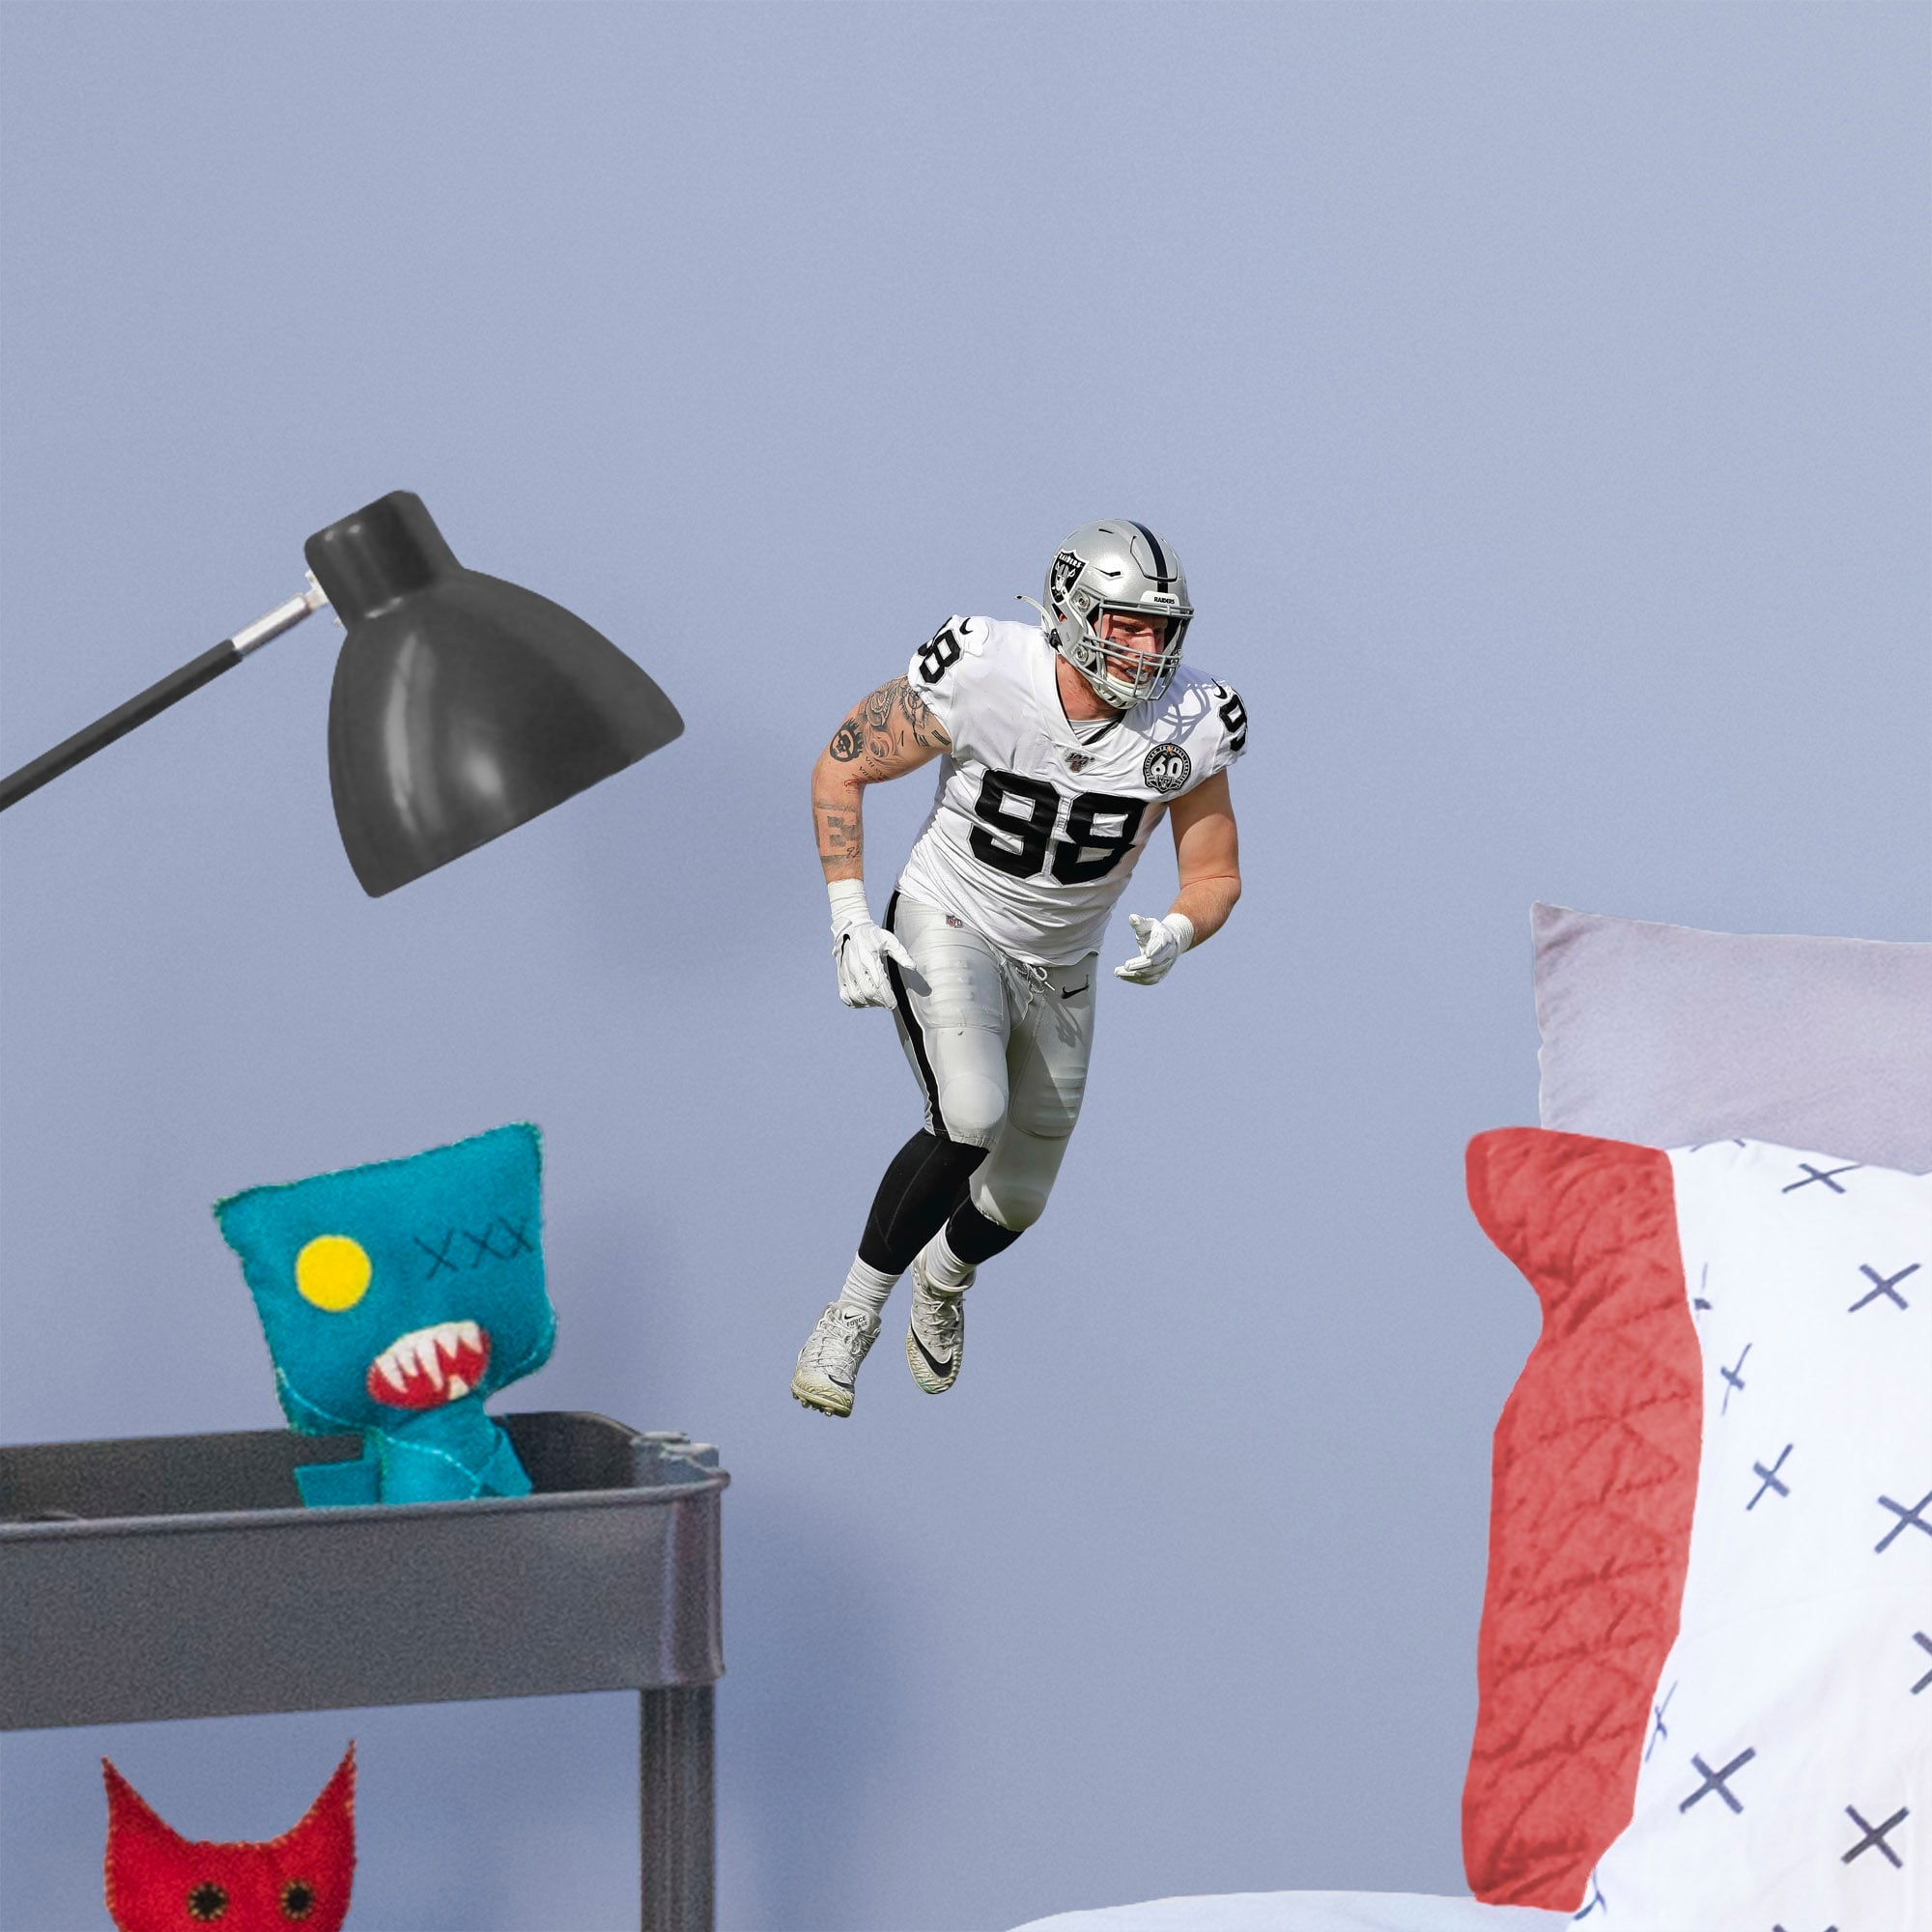 Maxx Crosby for Las Vegas Raiders - Officially Licensed NFL Removable Wall Decal Large by Fathead | Vinyl